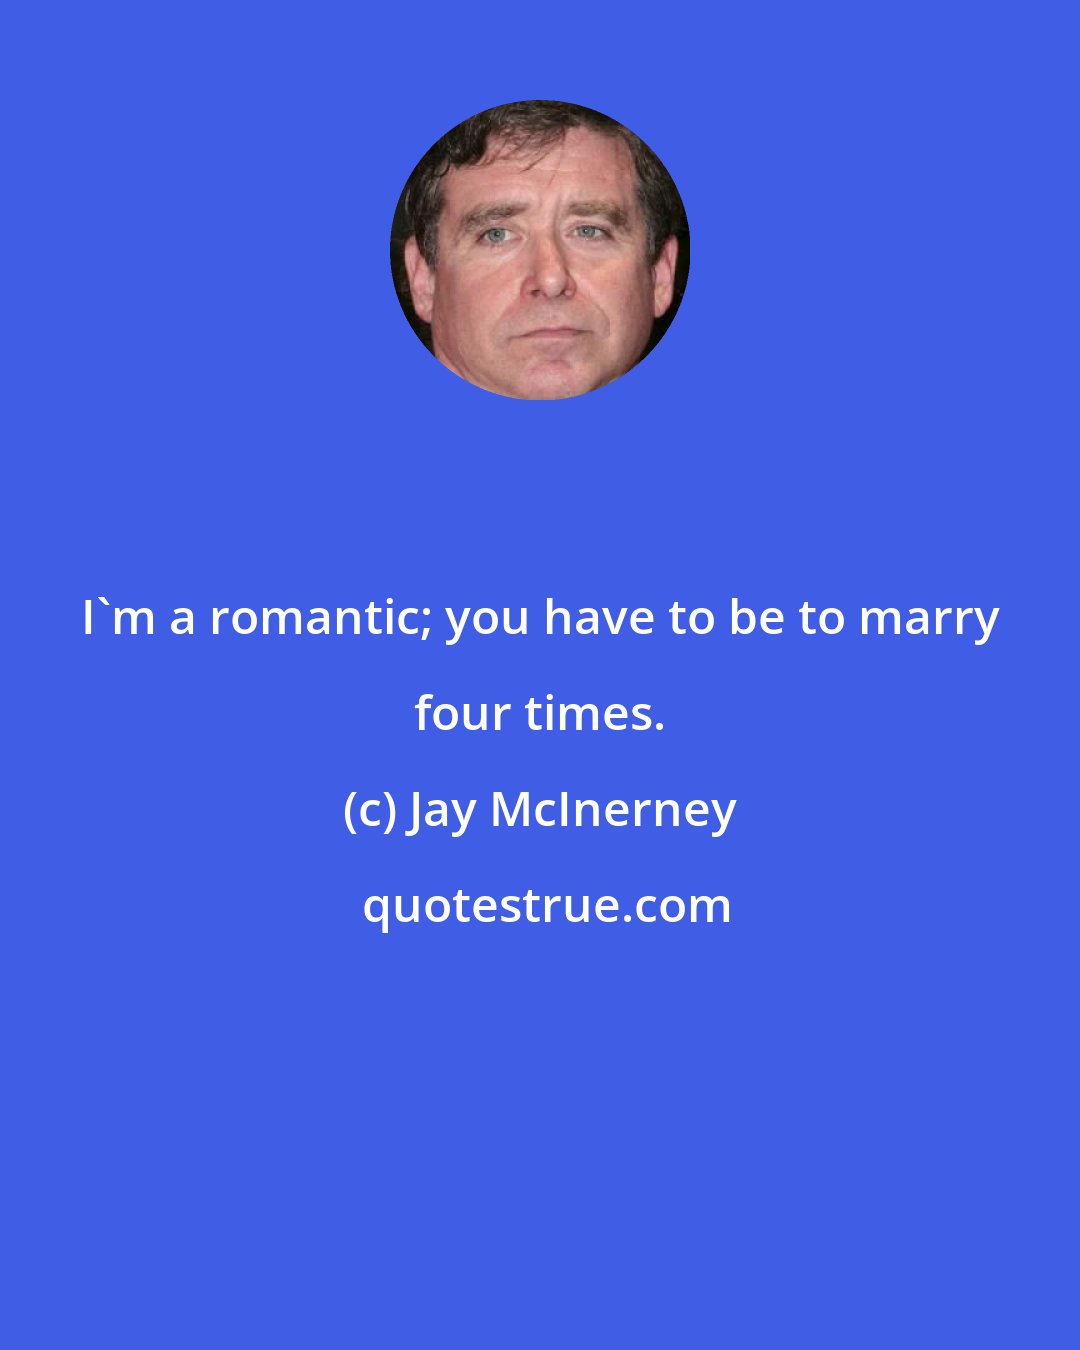 Jay McInerney: I'm a romantic; you have to be to marry four times.